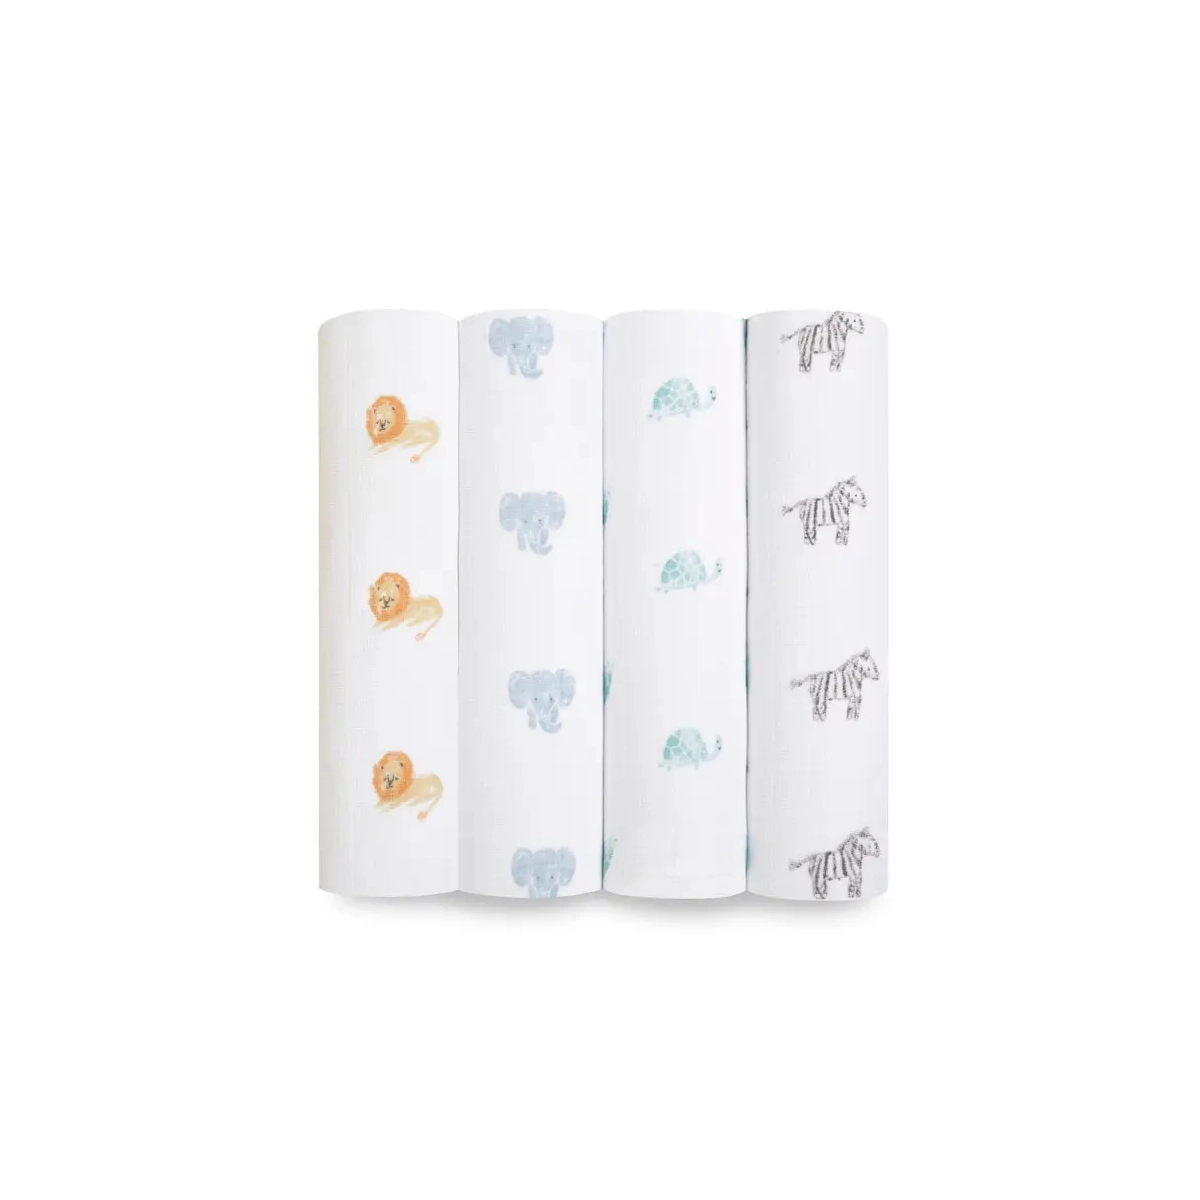 Aden + Anais Pack of 4 Large Swaddle Organic Cotton Muslin